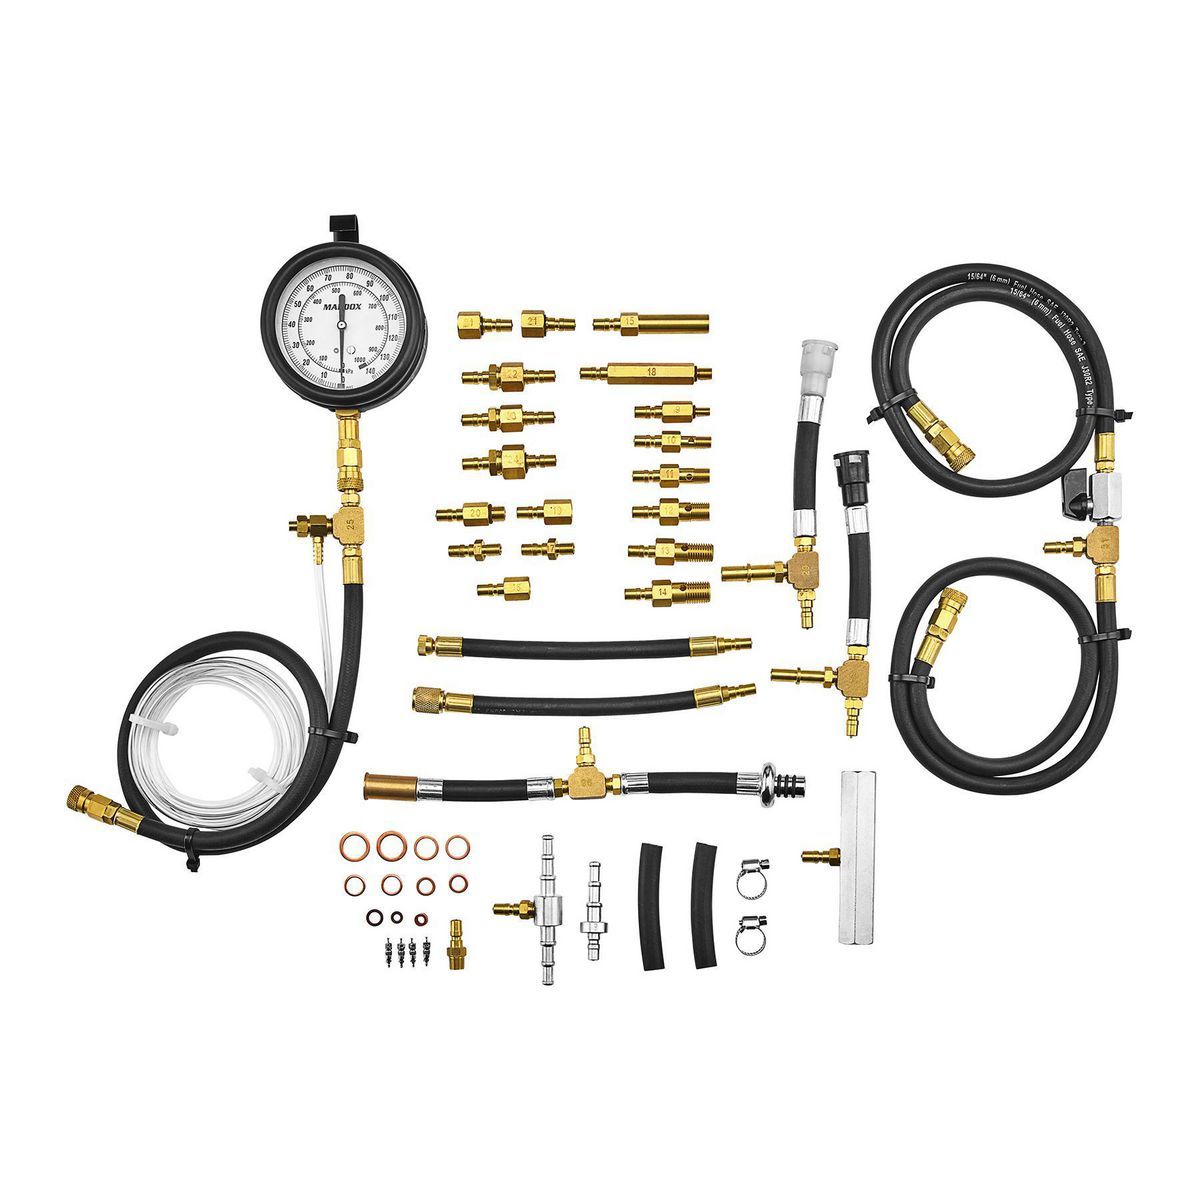 Deluxe Fuel Injection Service Kit